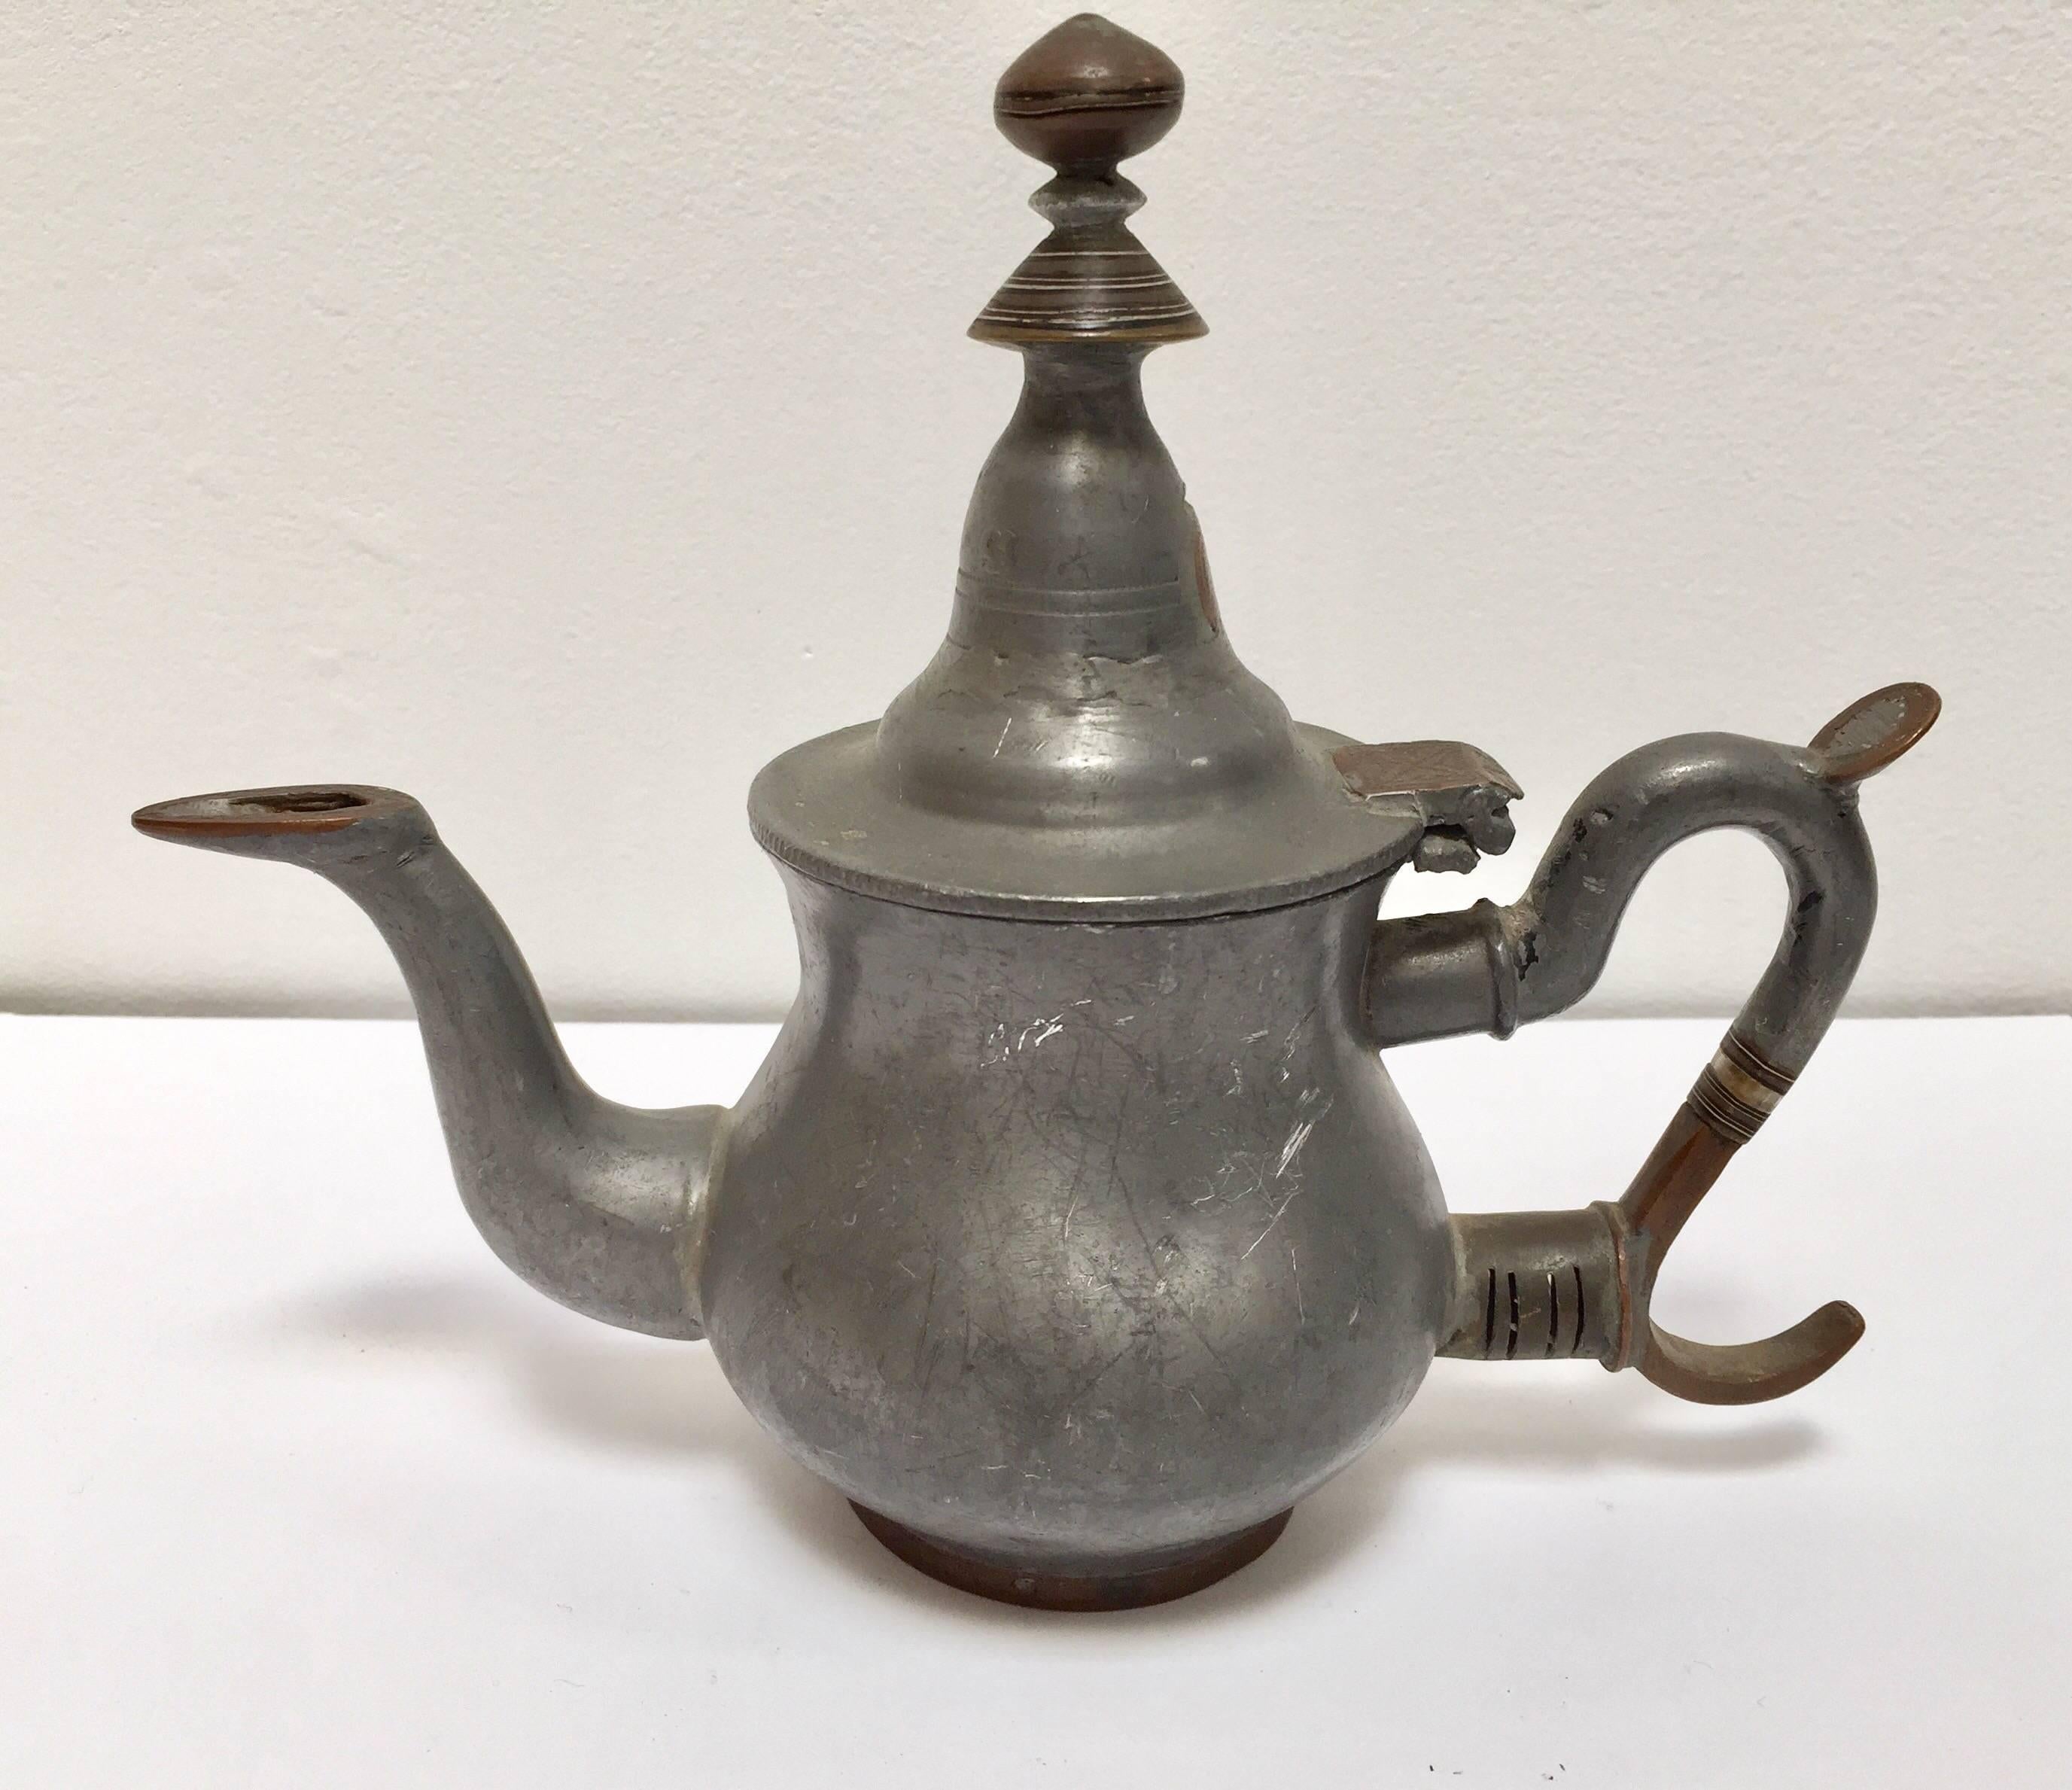 Mid-20th century Tuareg teapot Mauritania, Africa.
Handcrafted of pewter, copper and brass decorations.
The care, attention to detail and goldsmith techniques, used by the Tuareg to create their own jewelry, are also used in everyday objects.
The